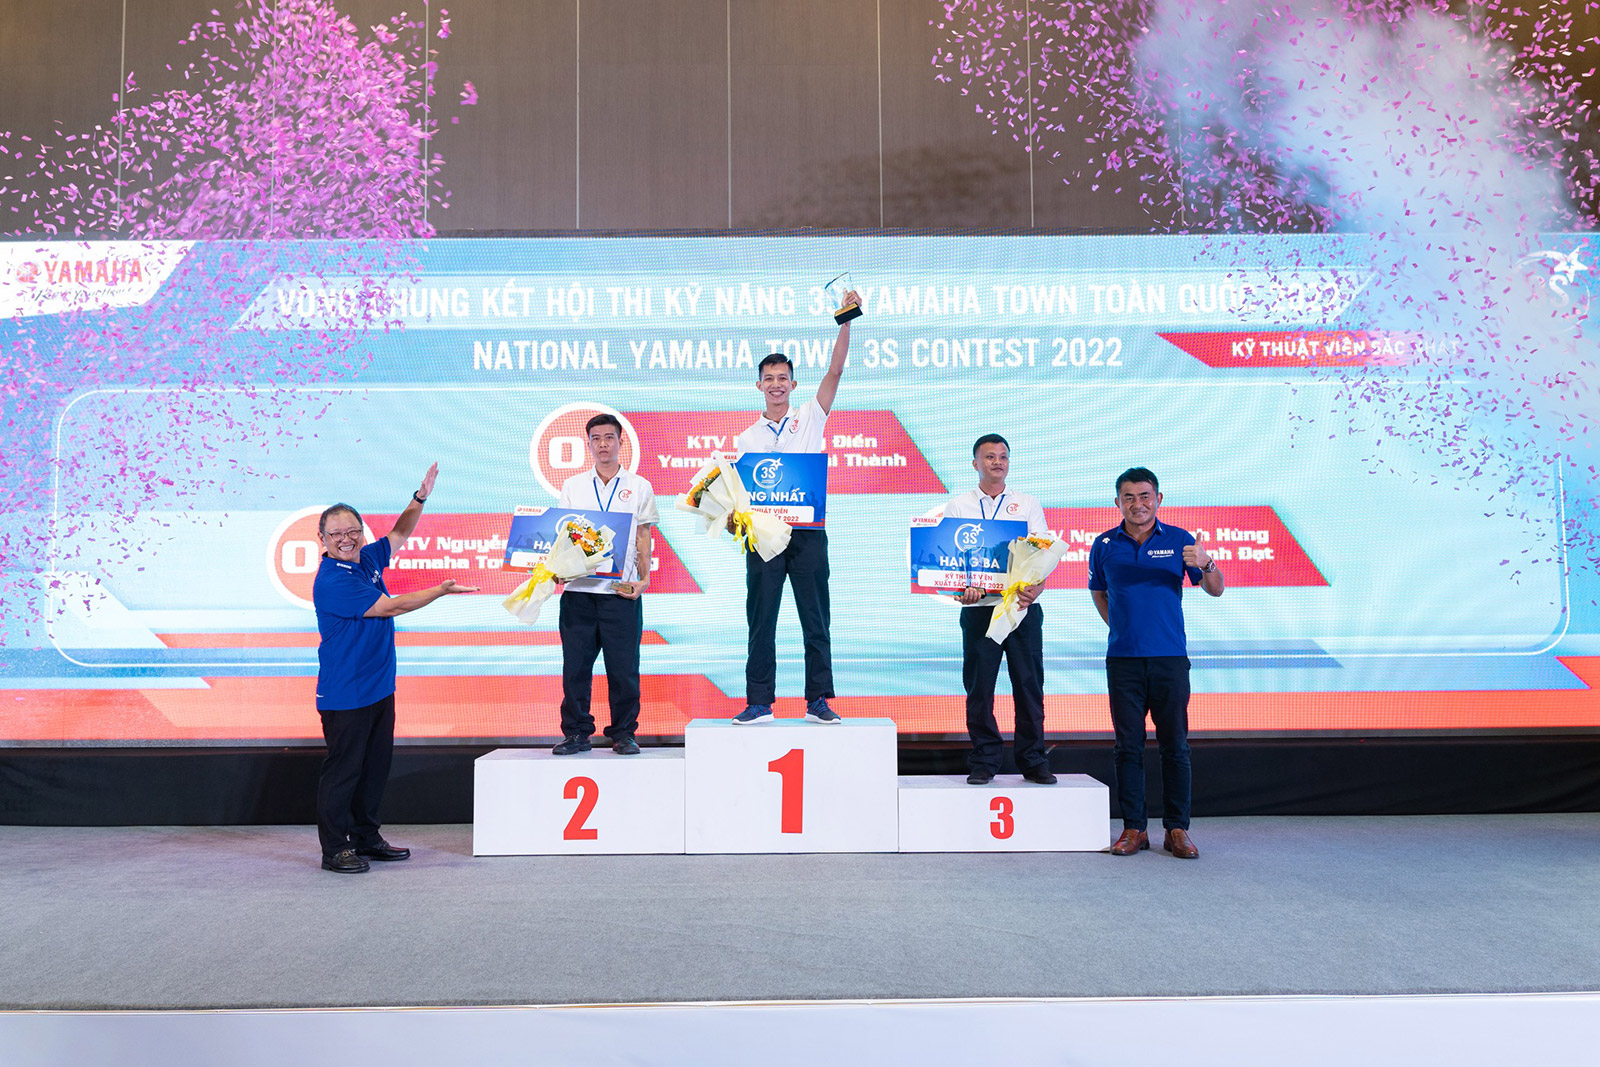 NATIONAL 3S YAMAHA TOWN SKILLS COMPETITION 2022 AT ARIYANA CONVENTION CENTRE